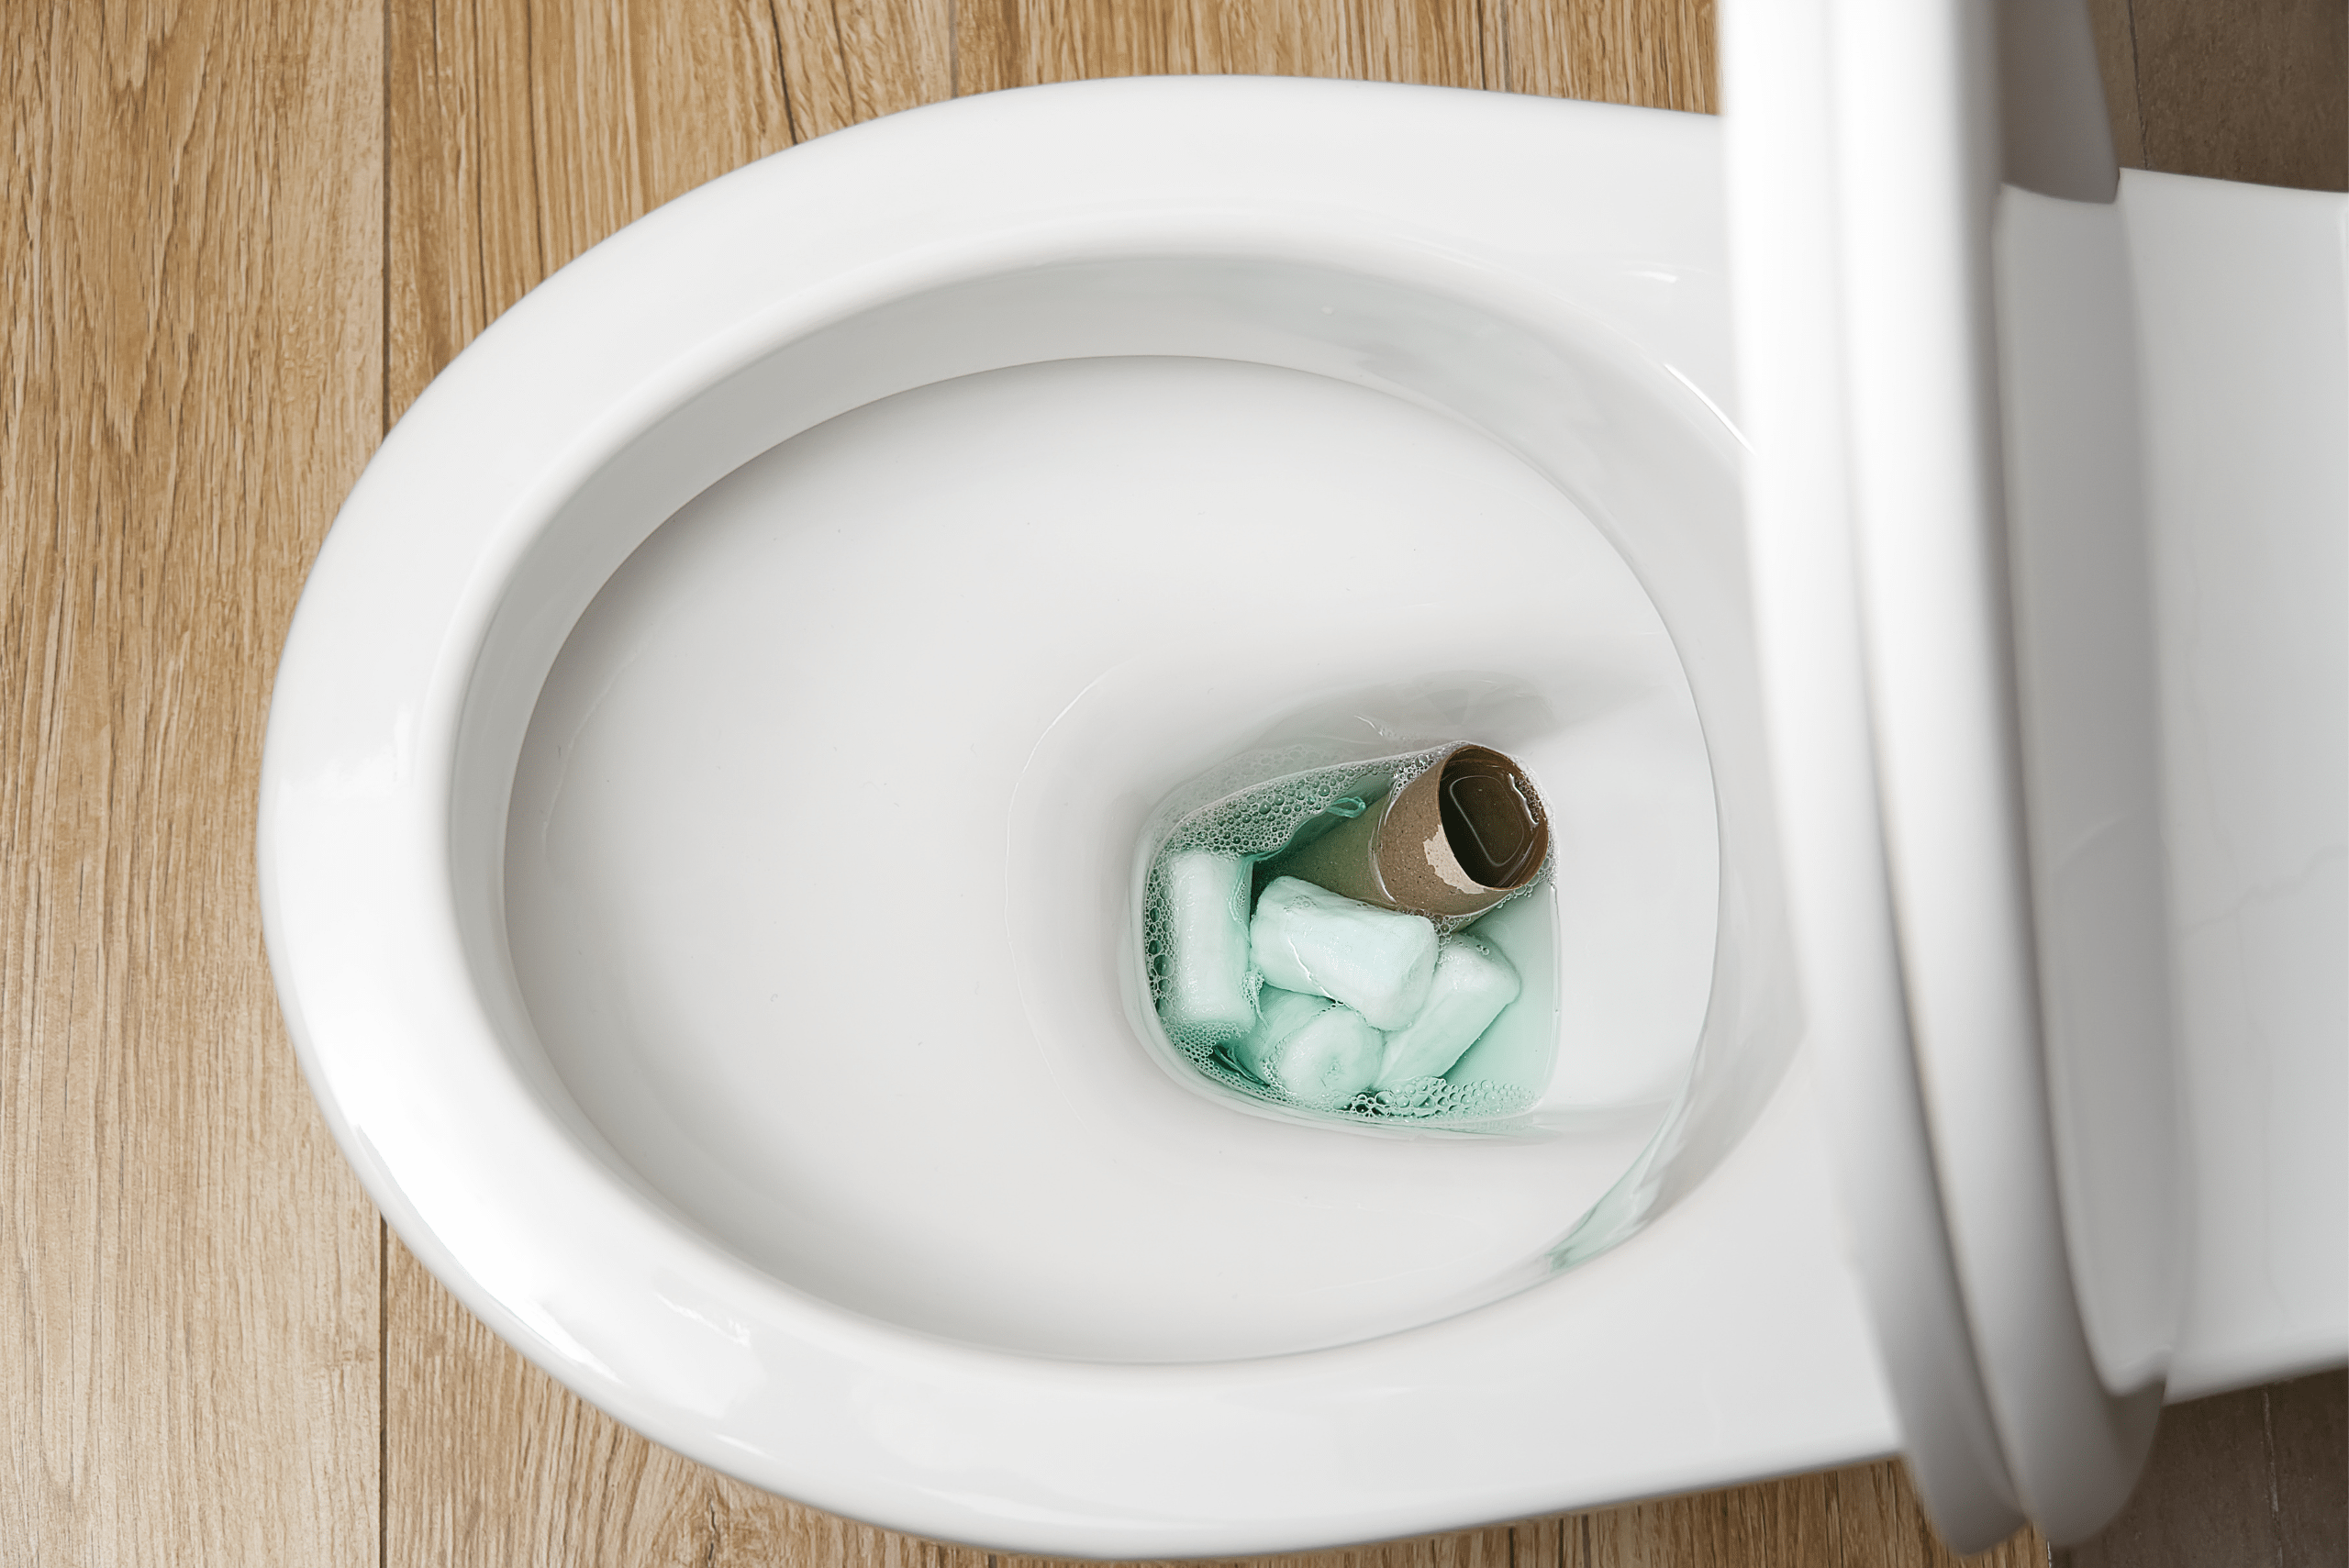 A toilet clogged with toilet paper roll.